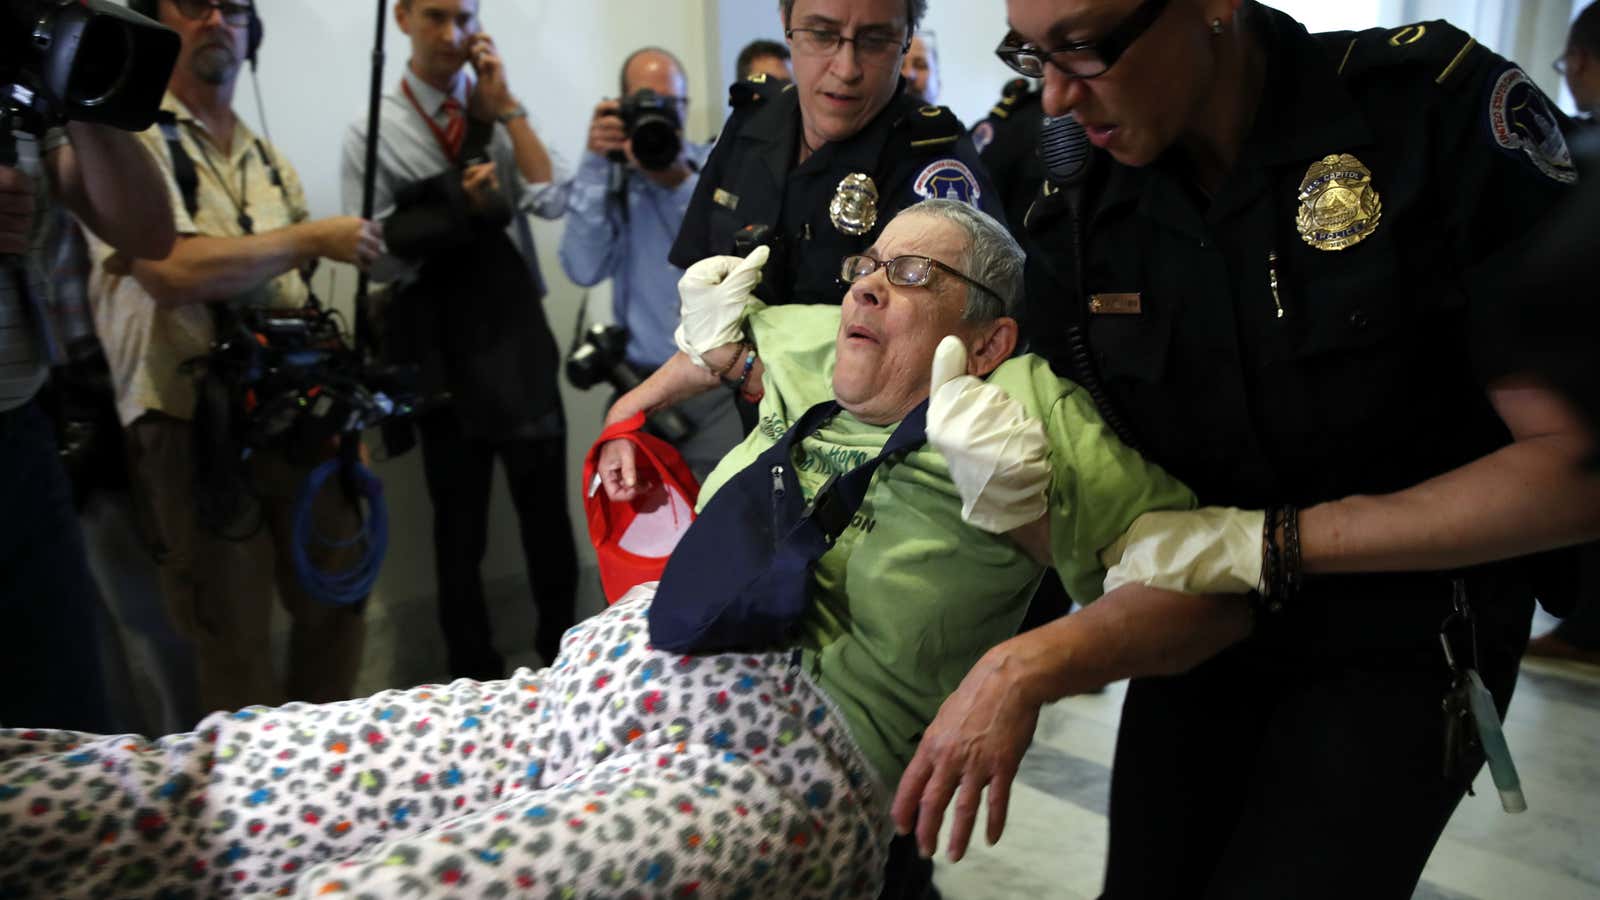 Demonstrators protesting cuts to Medicaid are removed from the hall outside Republican leader Mitch McConnell’s office.